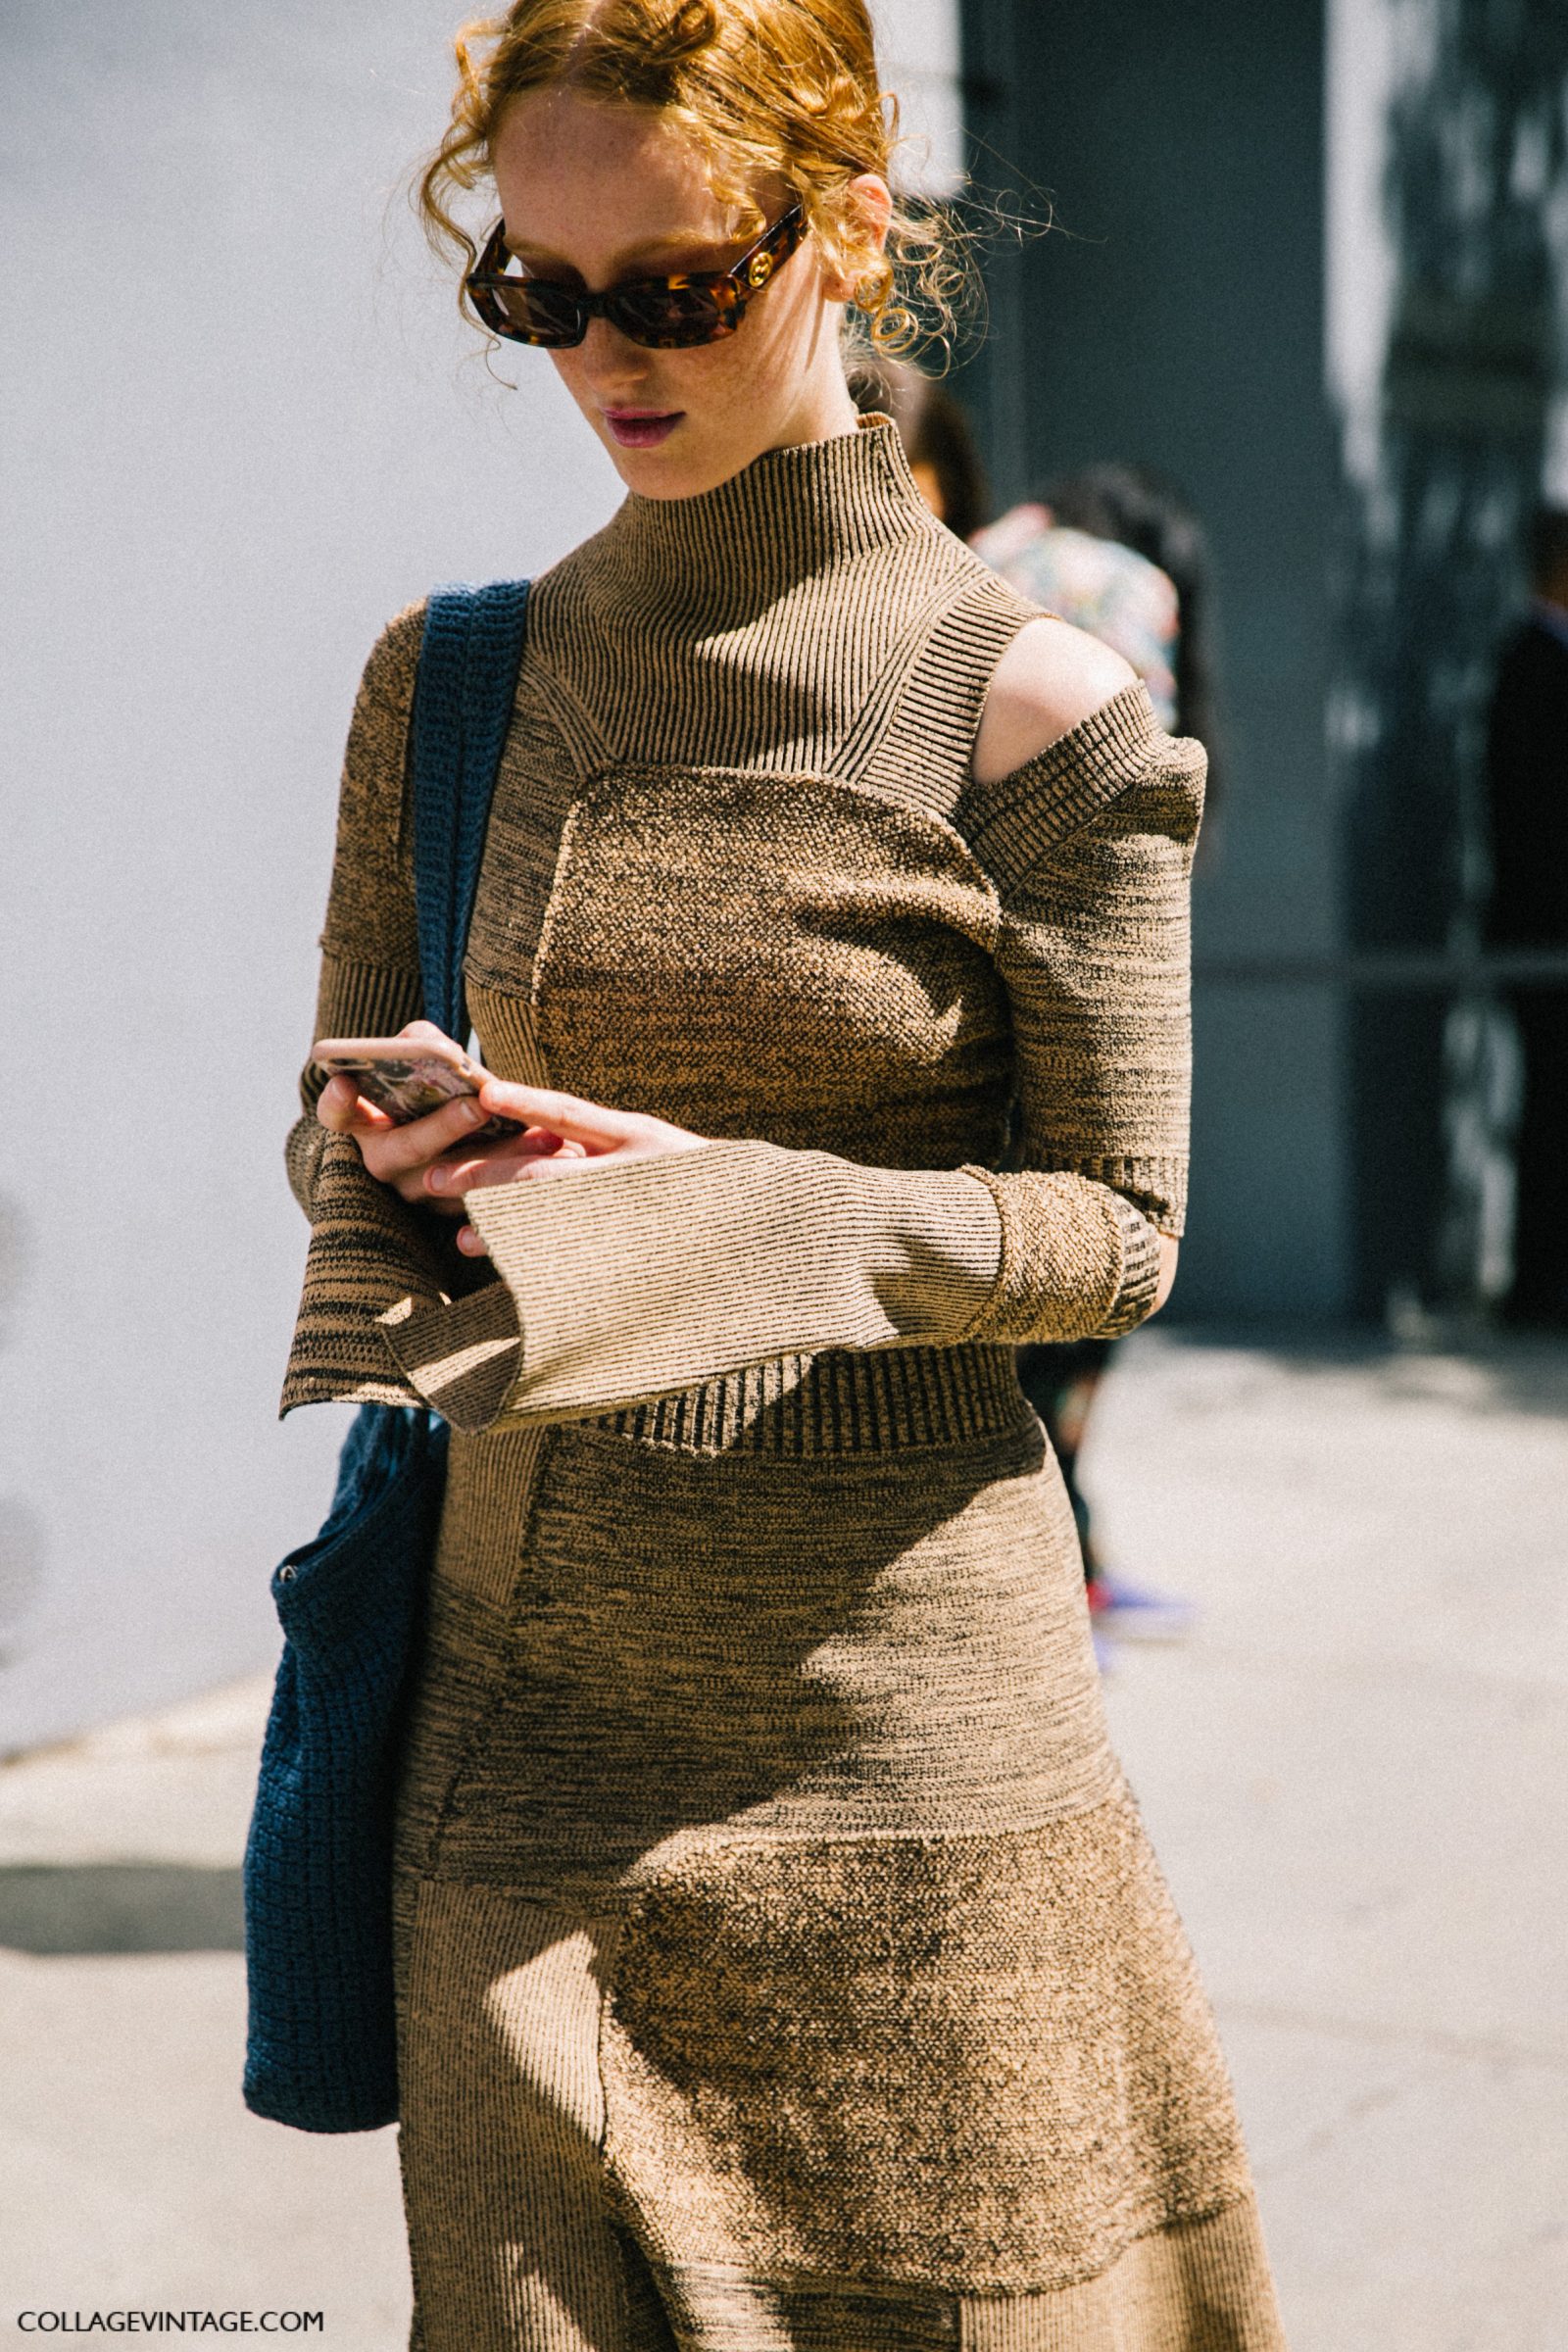 nyfw-new_york_fashion_week_ss17-street_style-outfits-collage_vintage-vintage-phillip_lim-the-row-proenza_schouler-rossie_aussolin-229